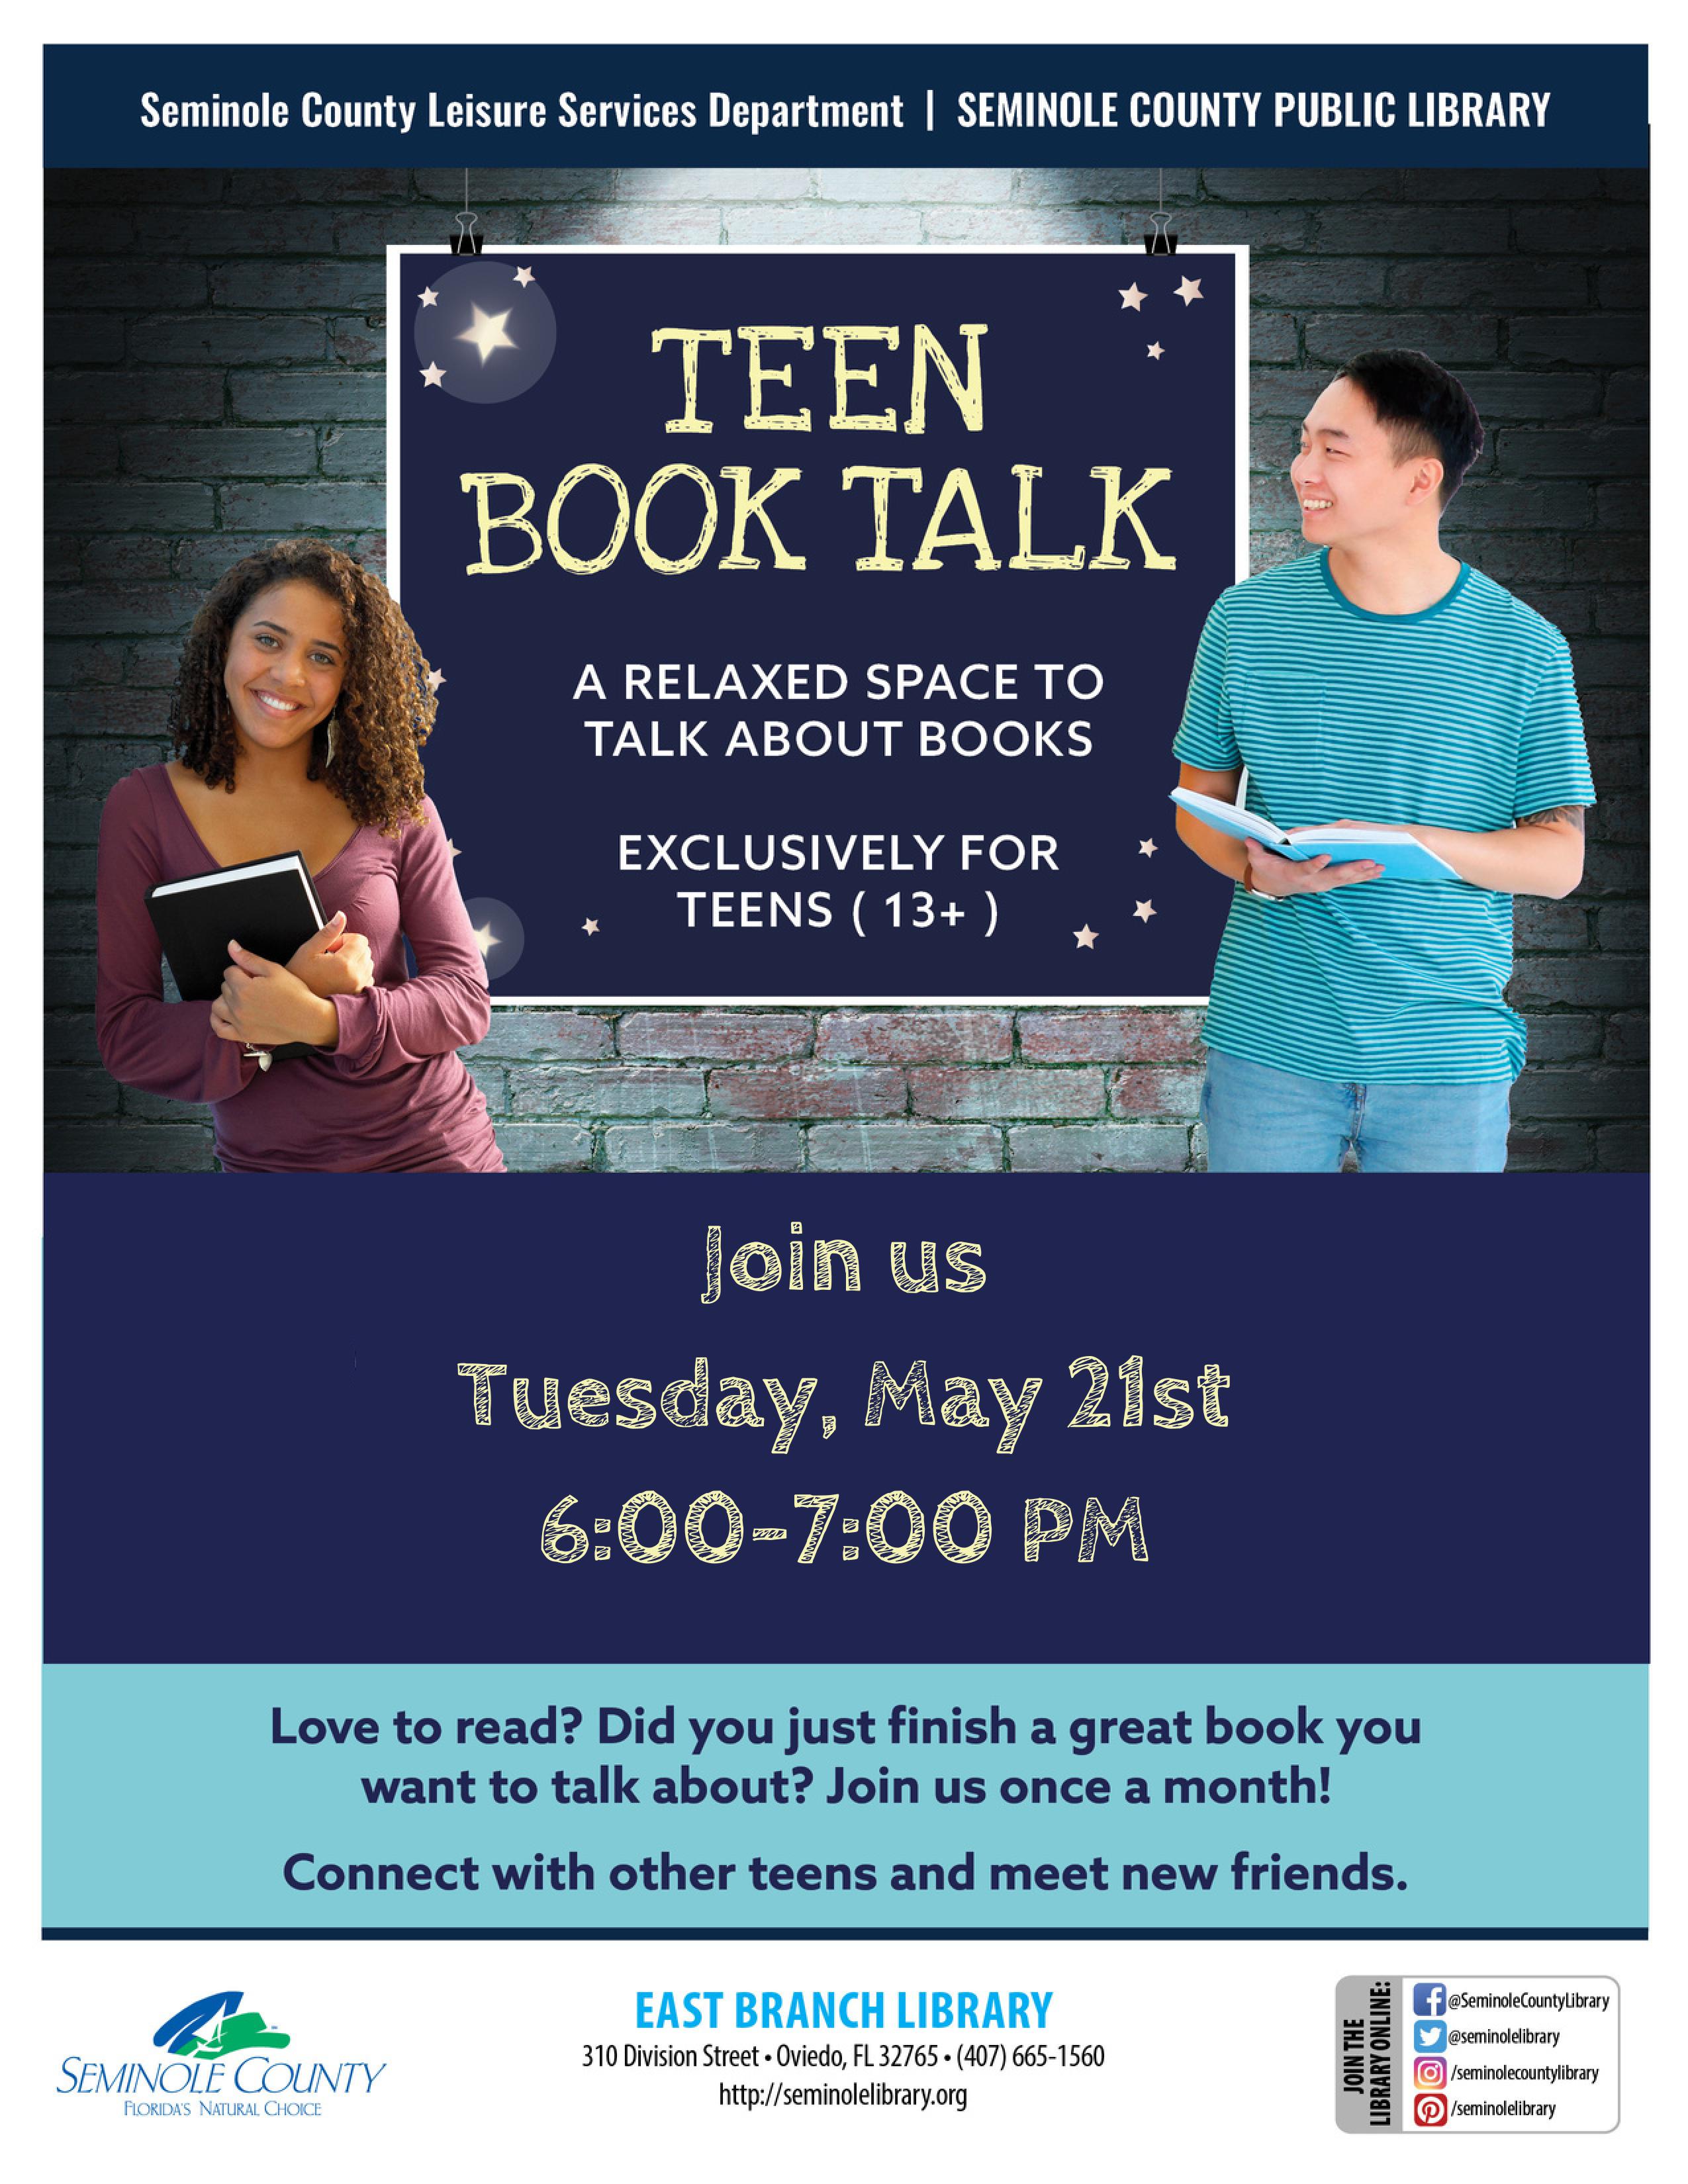 Teen Book Talk, May 21, East Branch Library